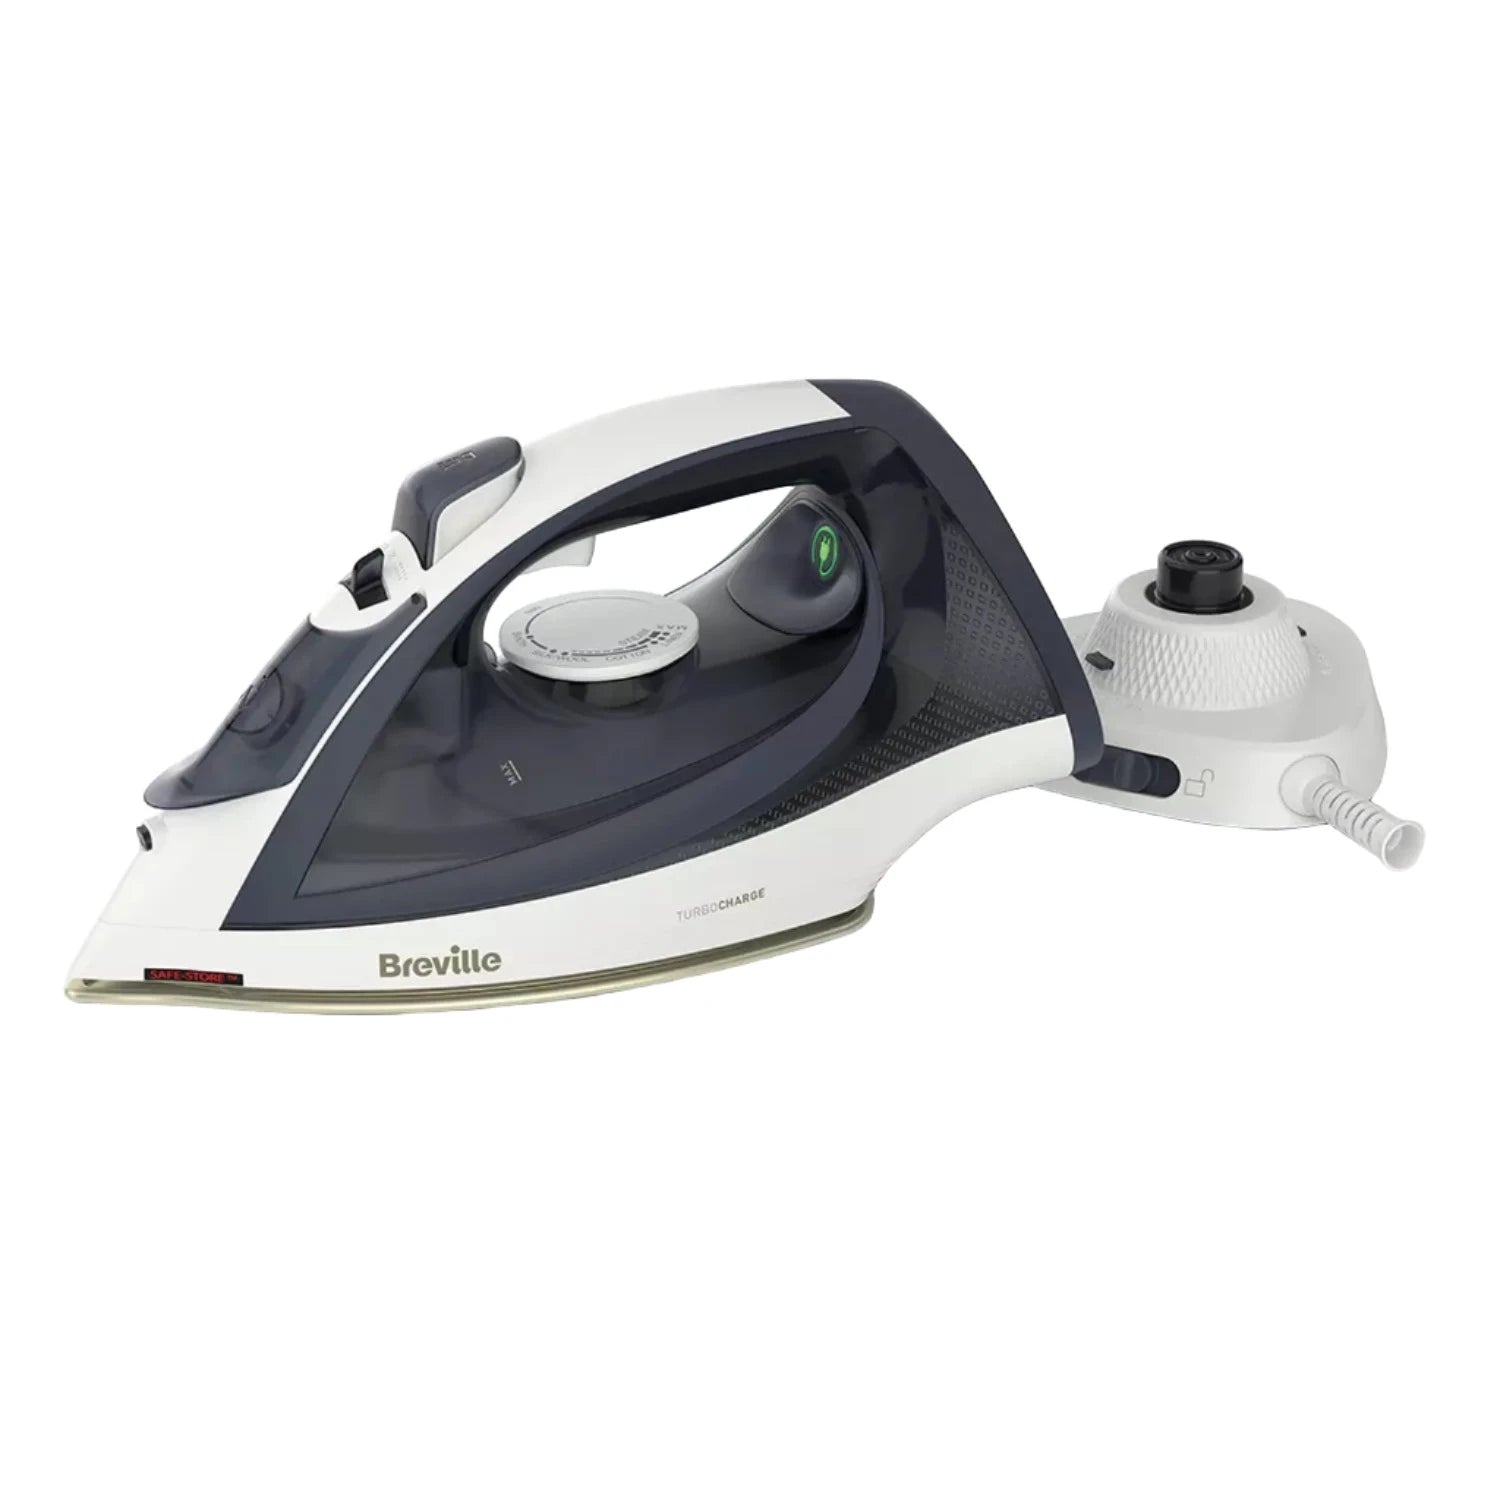 Breville Turbo Charge Cordless Iron: Vin439